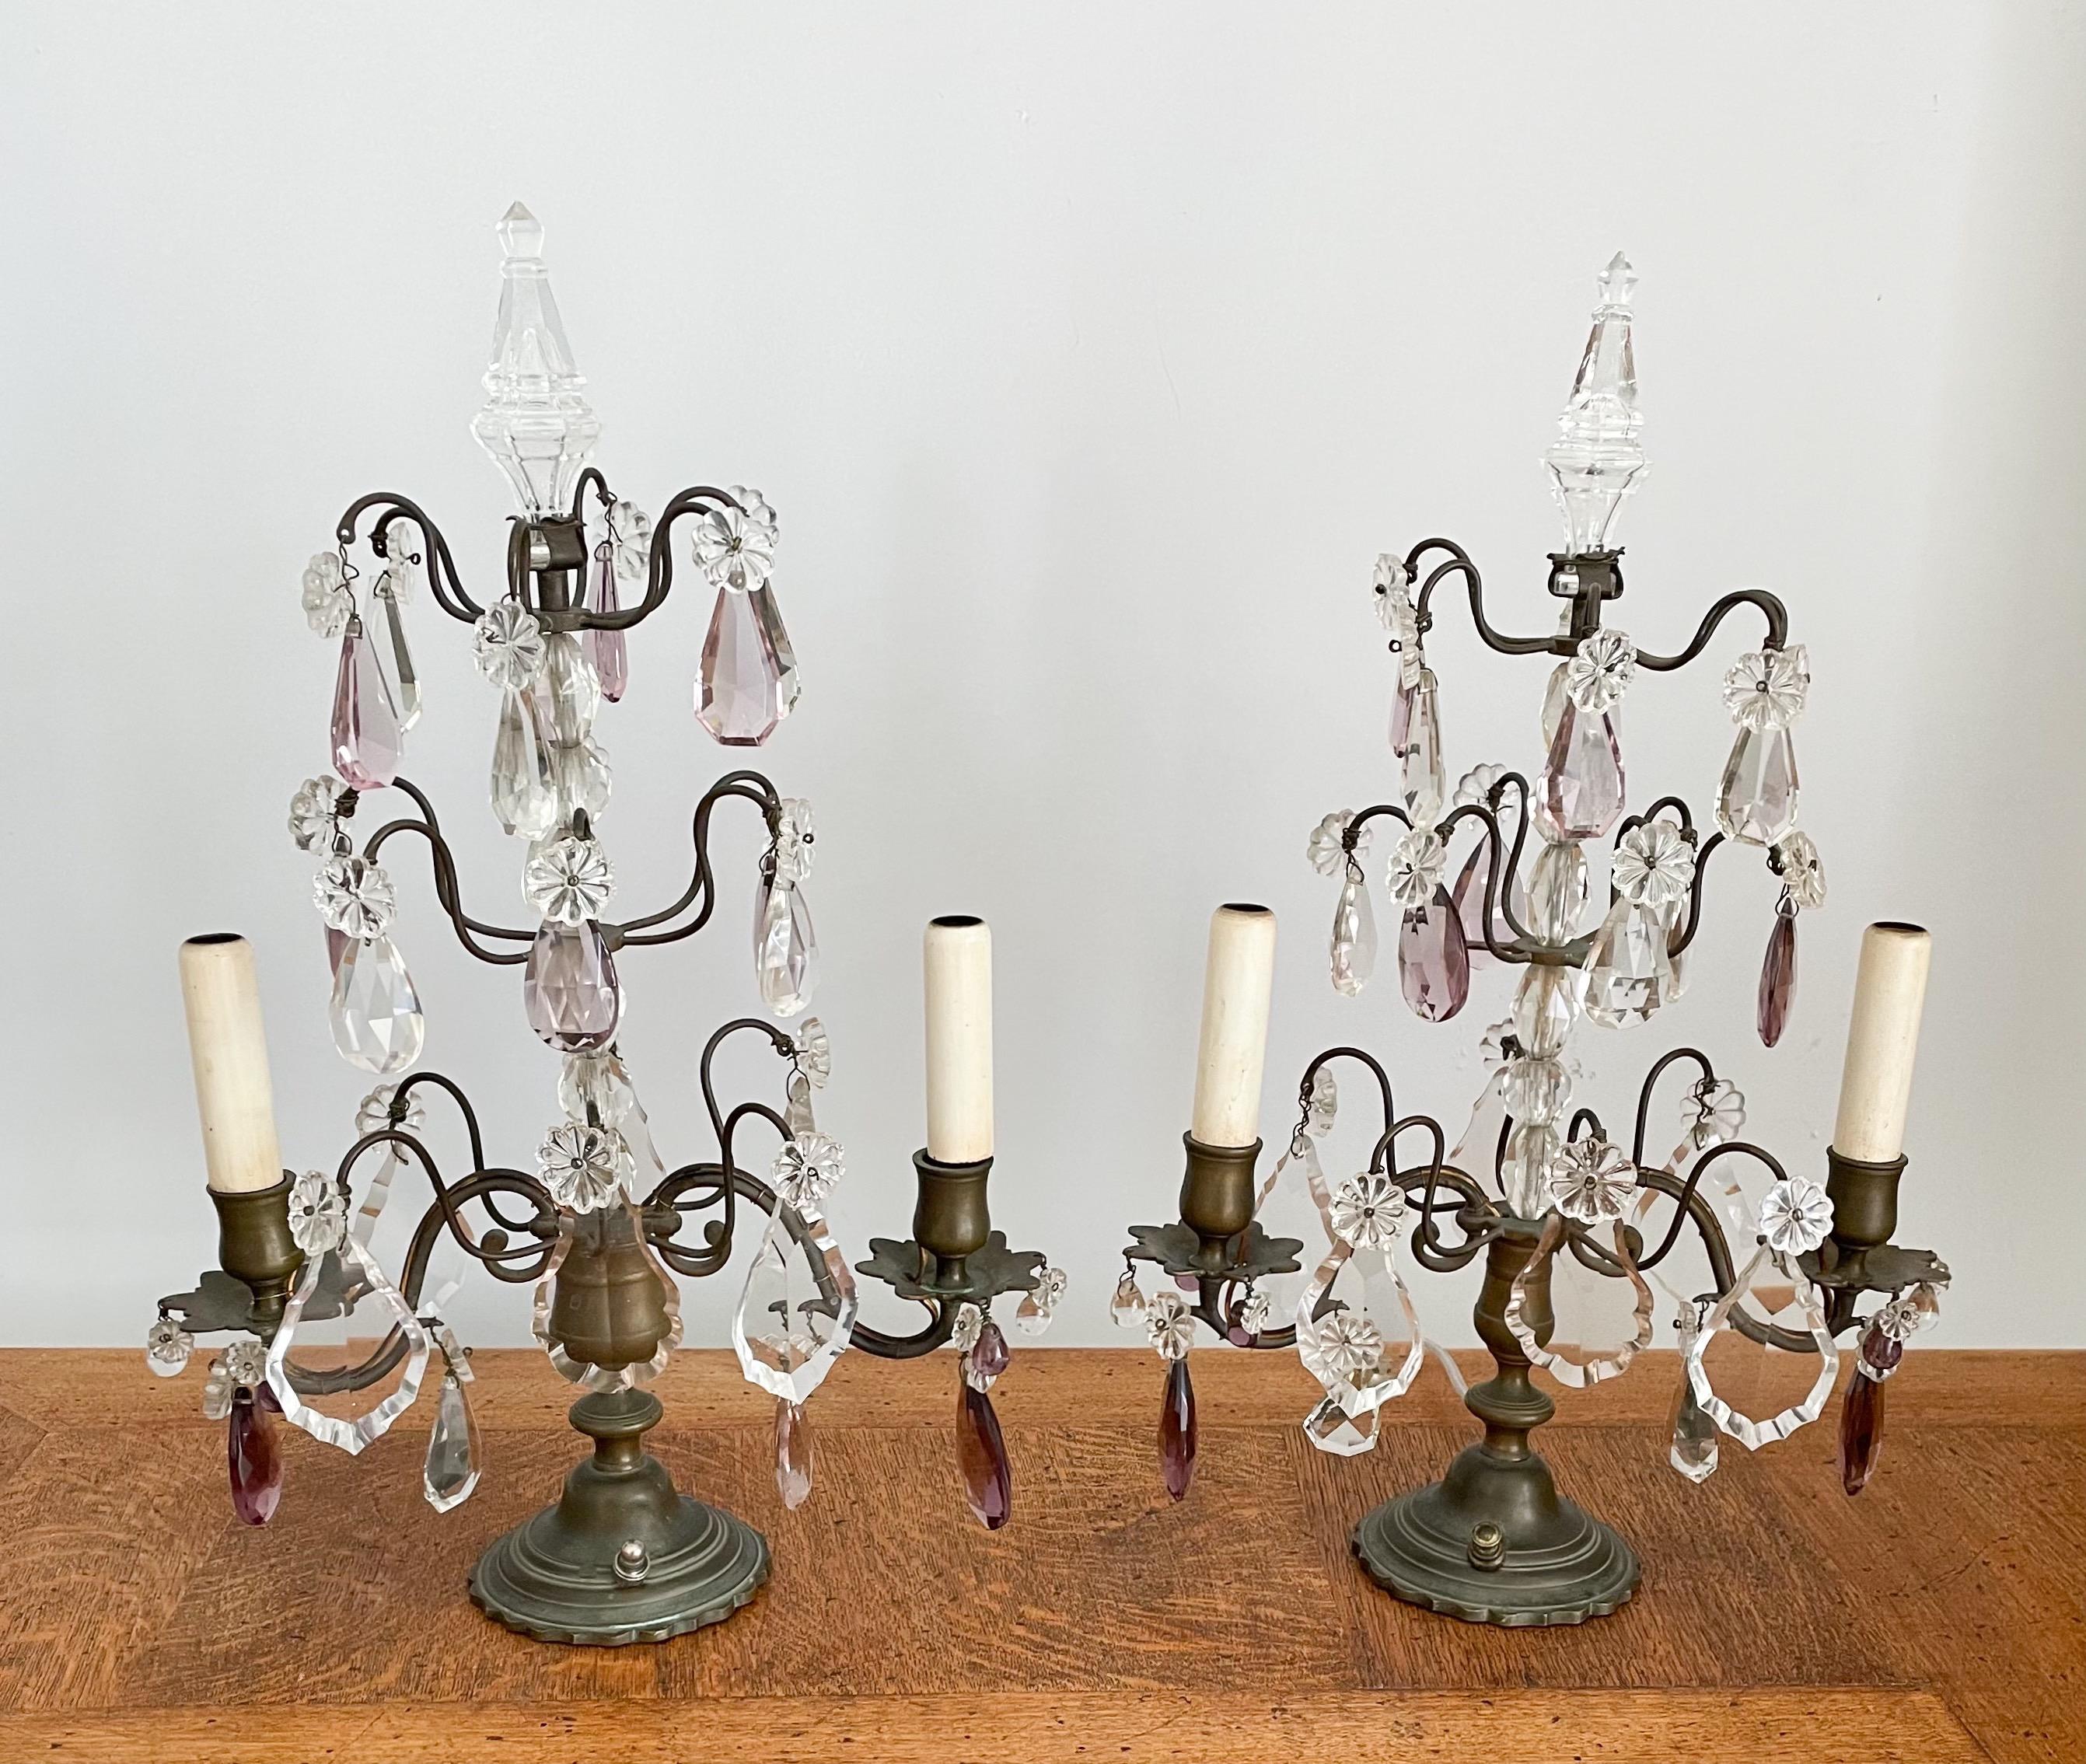 Gorgeous, 1920s French Louis XVI-style pair of bronze and crystal girandoles.

Each girandole consists of a delicate bronze frame embellished with faceted prisms in clear and light-amethyst tones. There is a hollow glass spike decorating the top